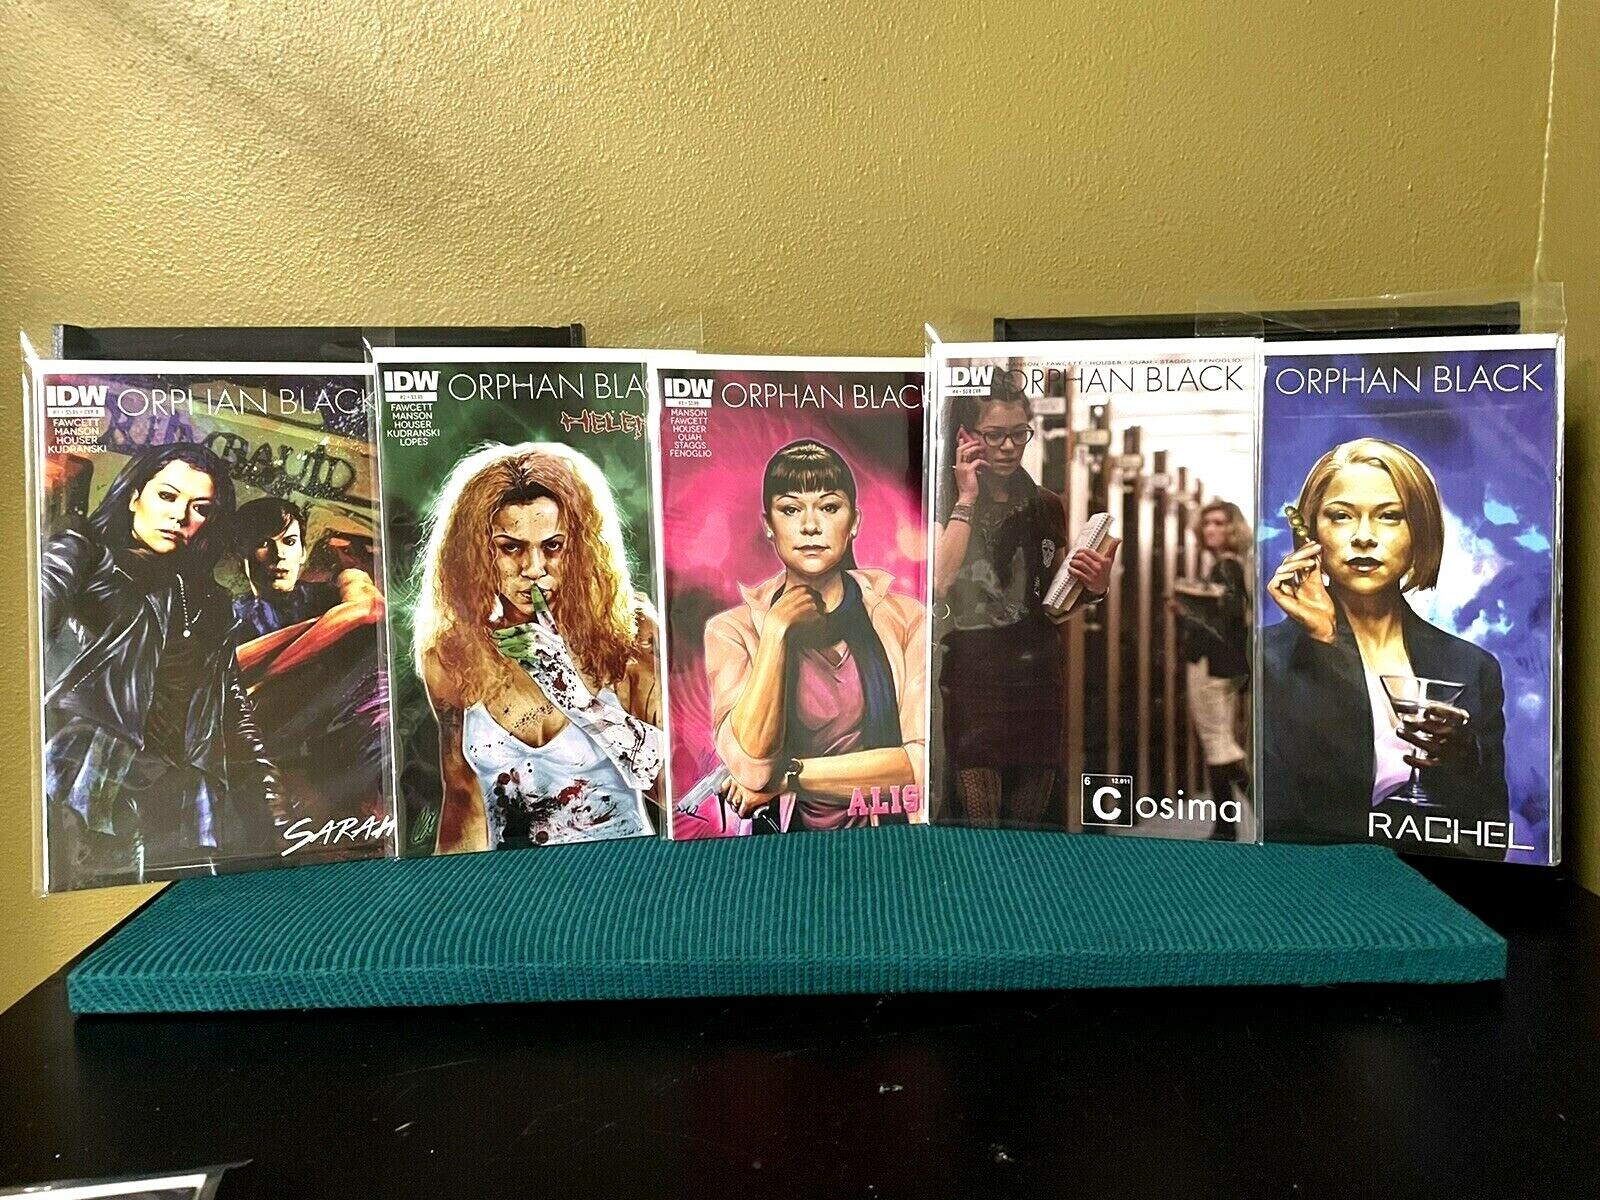 ORPHAN BLACK - COMIC BOOK VOLUMES 1-5 - #1 RARE VARIANT COVER AND #4 SUB COVER